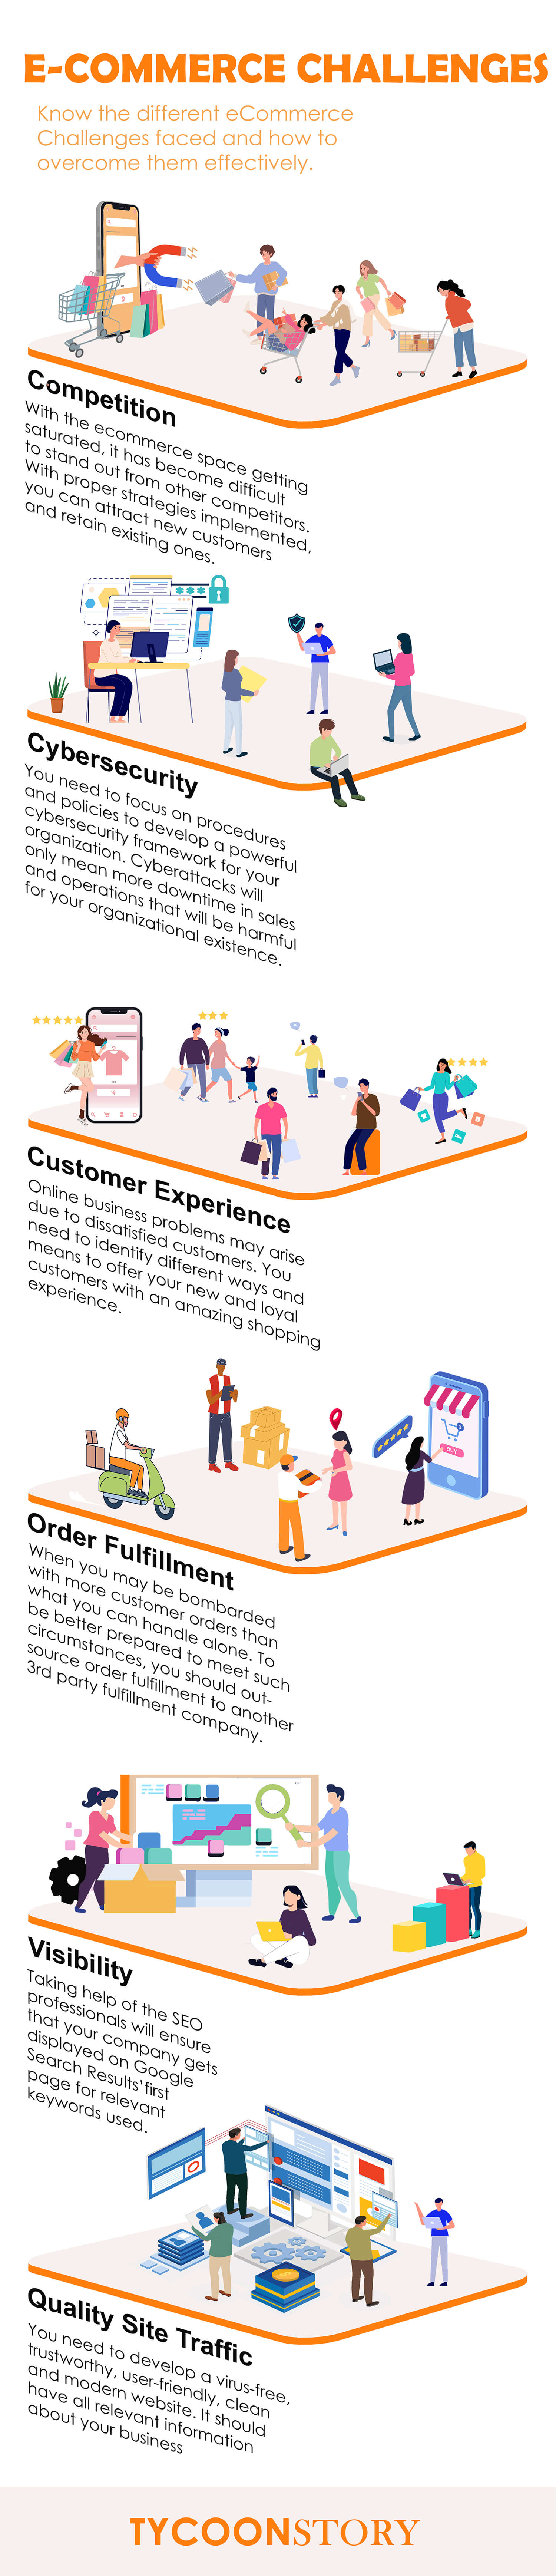 Top ecommerce challenges facing small businesses infographics